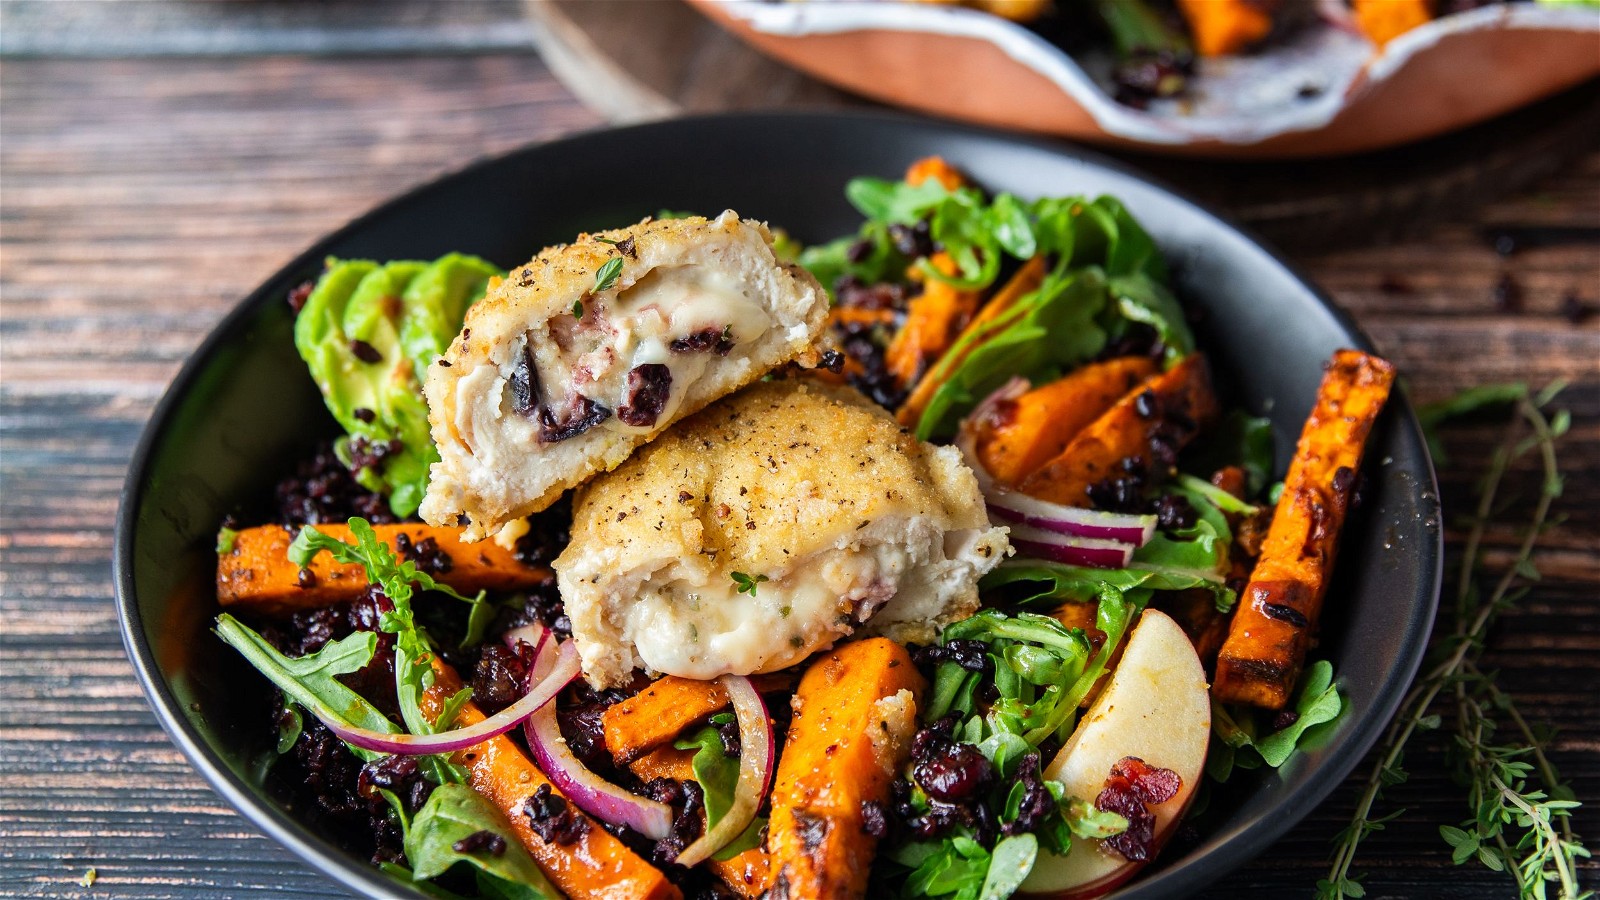 Image of Apple, Brie and Cranberry Stuffed Chicken with Wild Rice Sweet Potato Salad